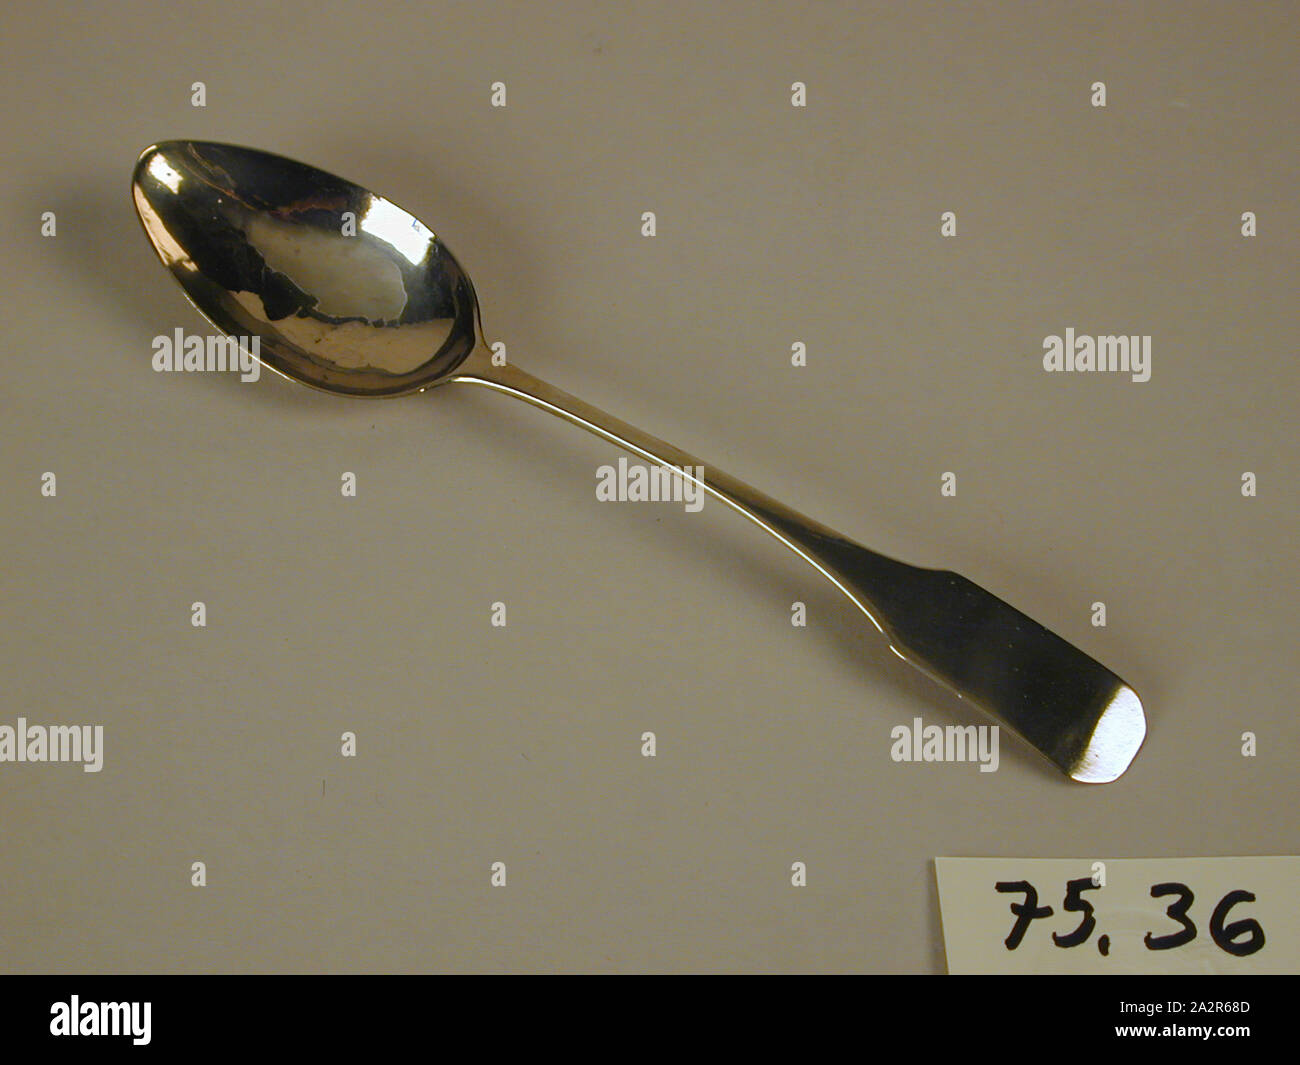 https://c8.alamy.com/comp/2A2R68D/teaspoon-between-1810-and-1820-silver-overall-5-78-1-14-12-inches-149-32-13-cm-2A2R68D.jpg